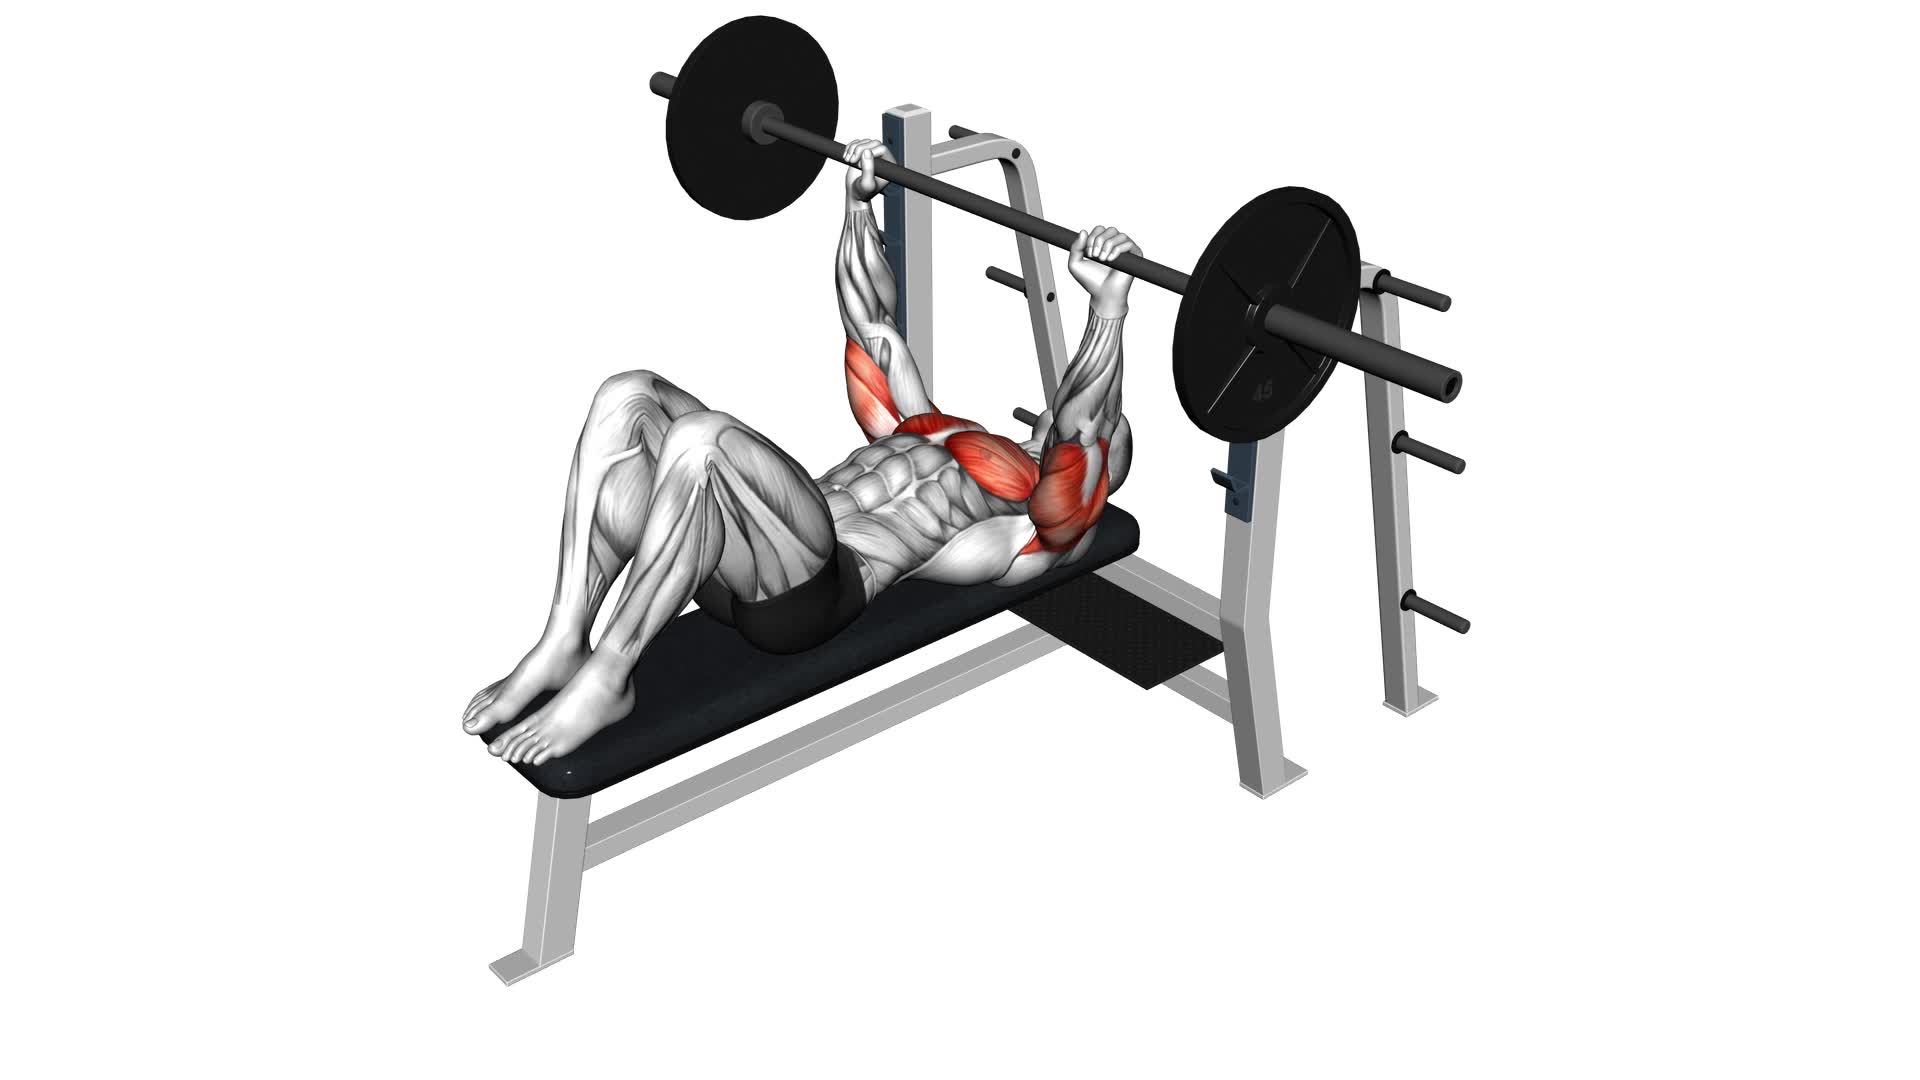 Barbell Feet Flat Bench Press (male) - Video Exercise Guide & Tips